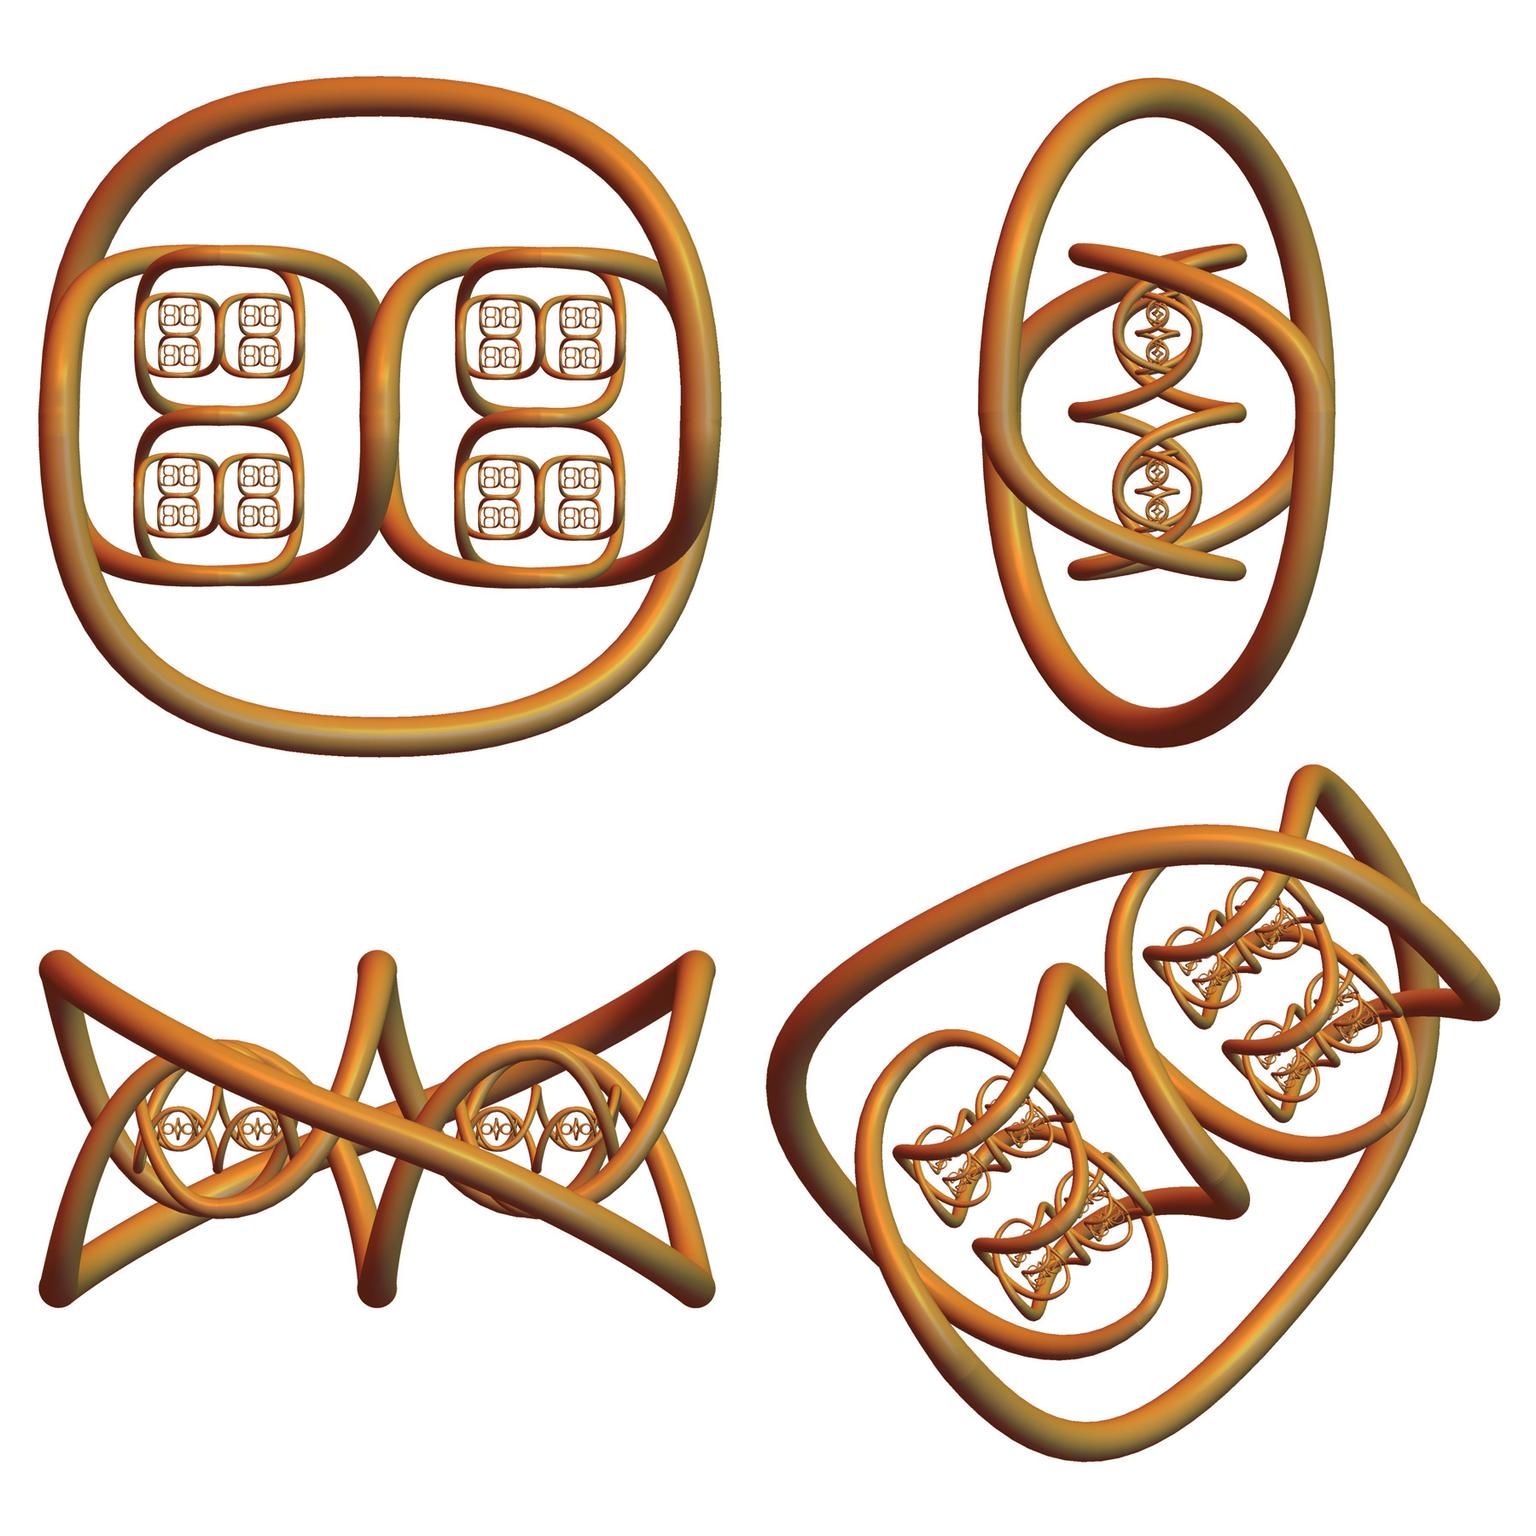 Image for entry 'Five Iterations of a Trefoil Knot, Four Views'